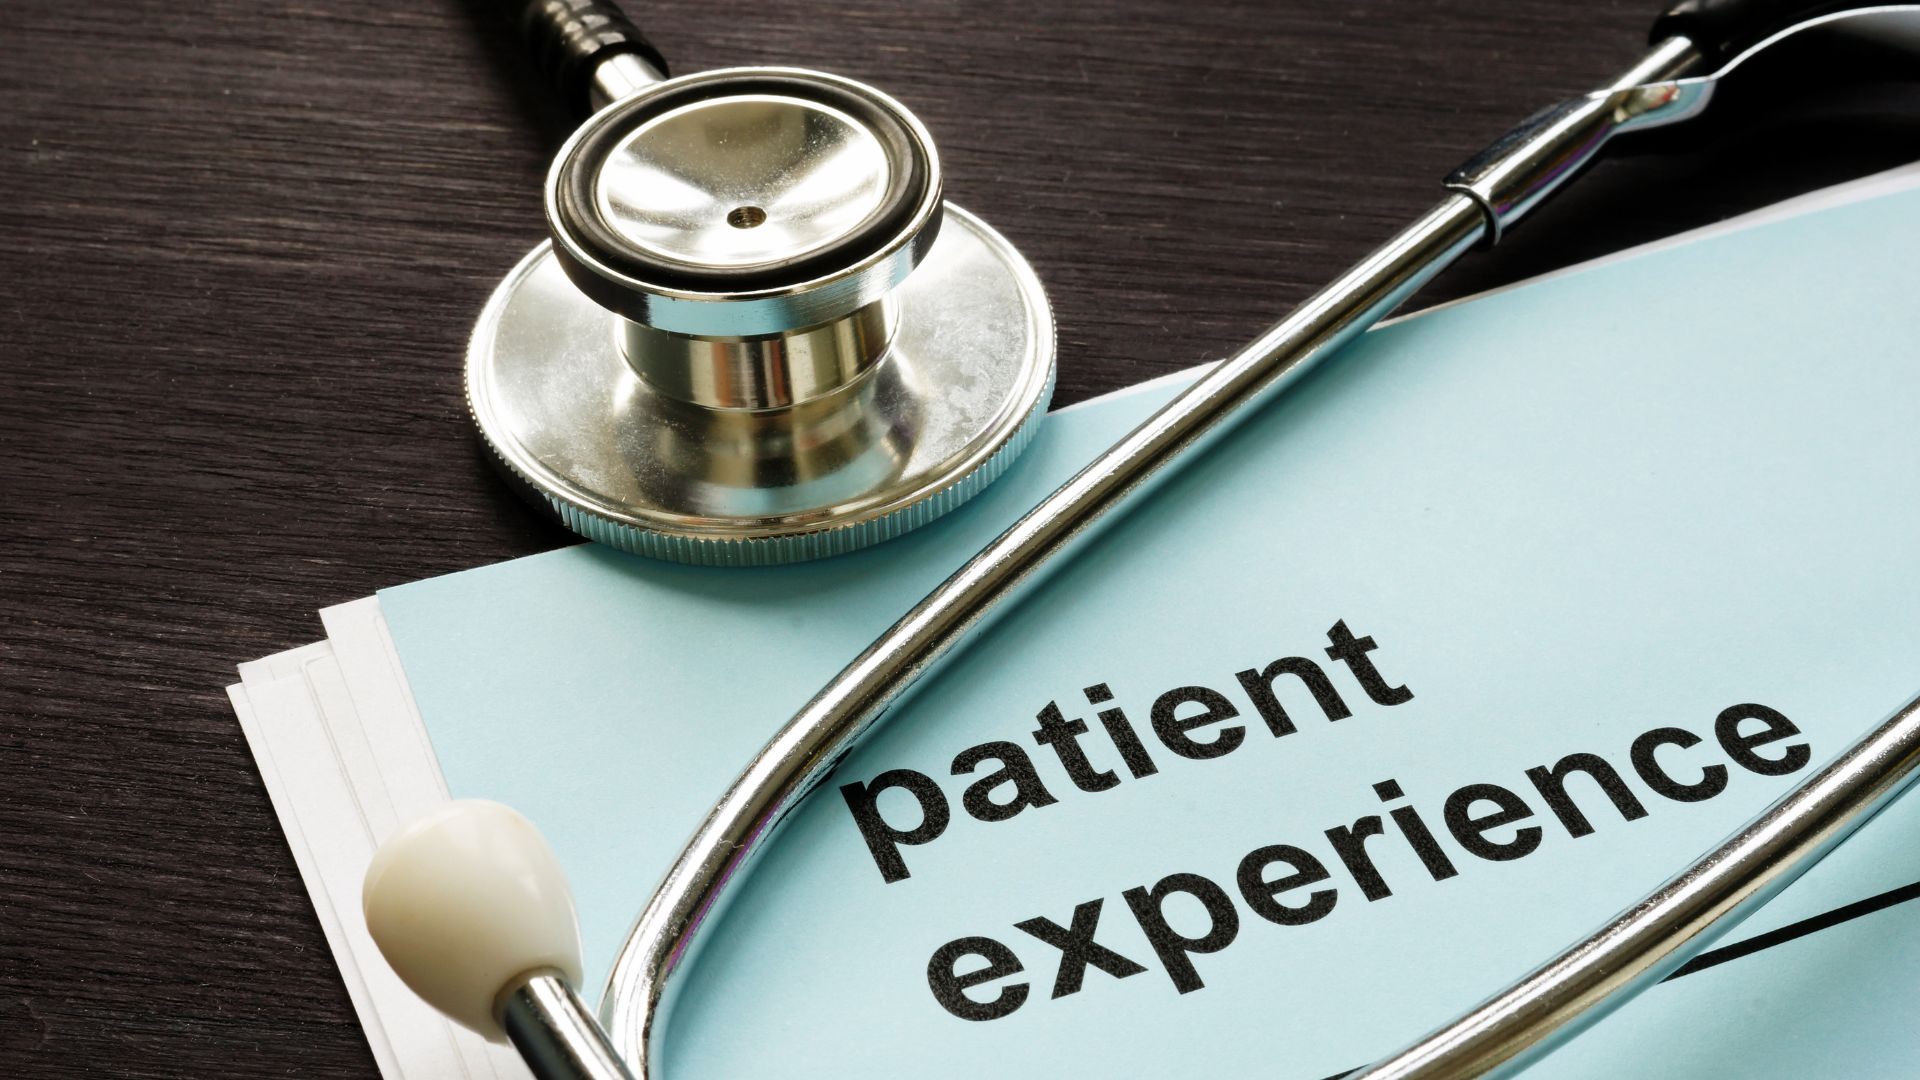 What Is Patient Experience and Why Is the Concept So Important?